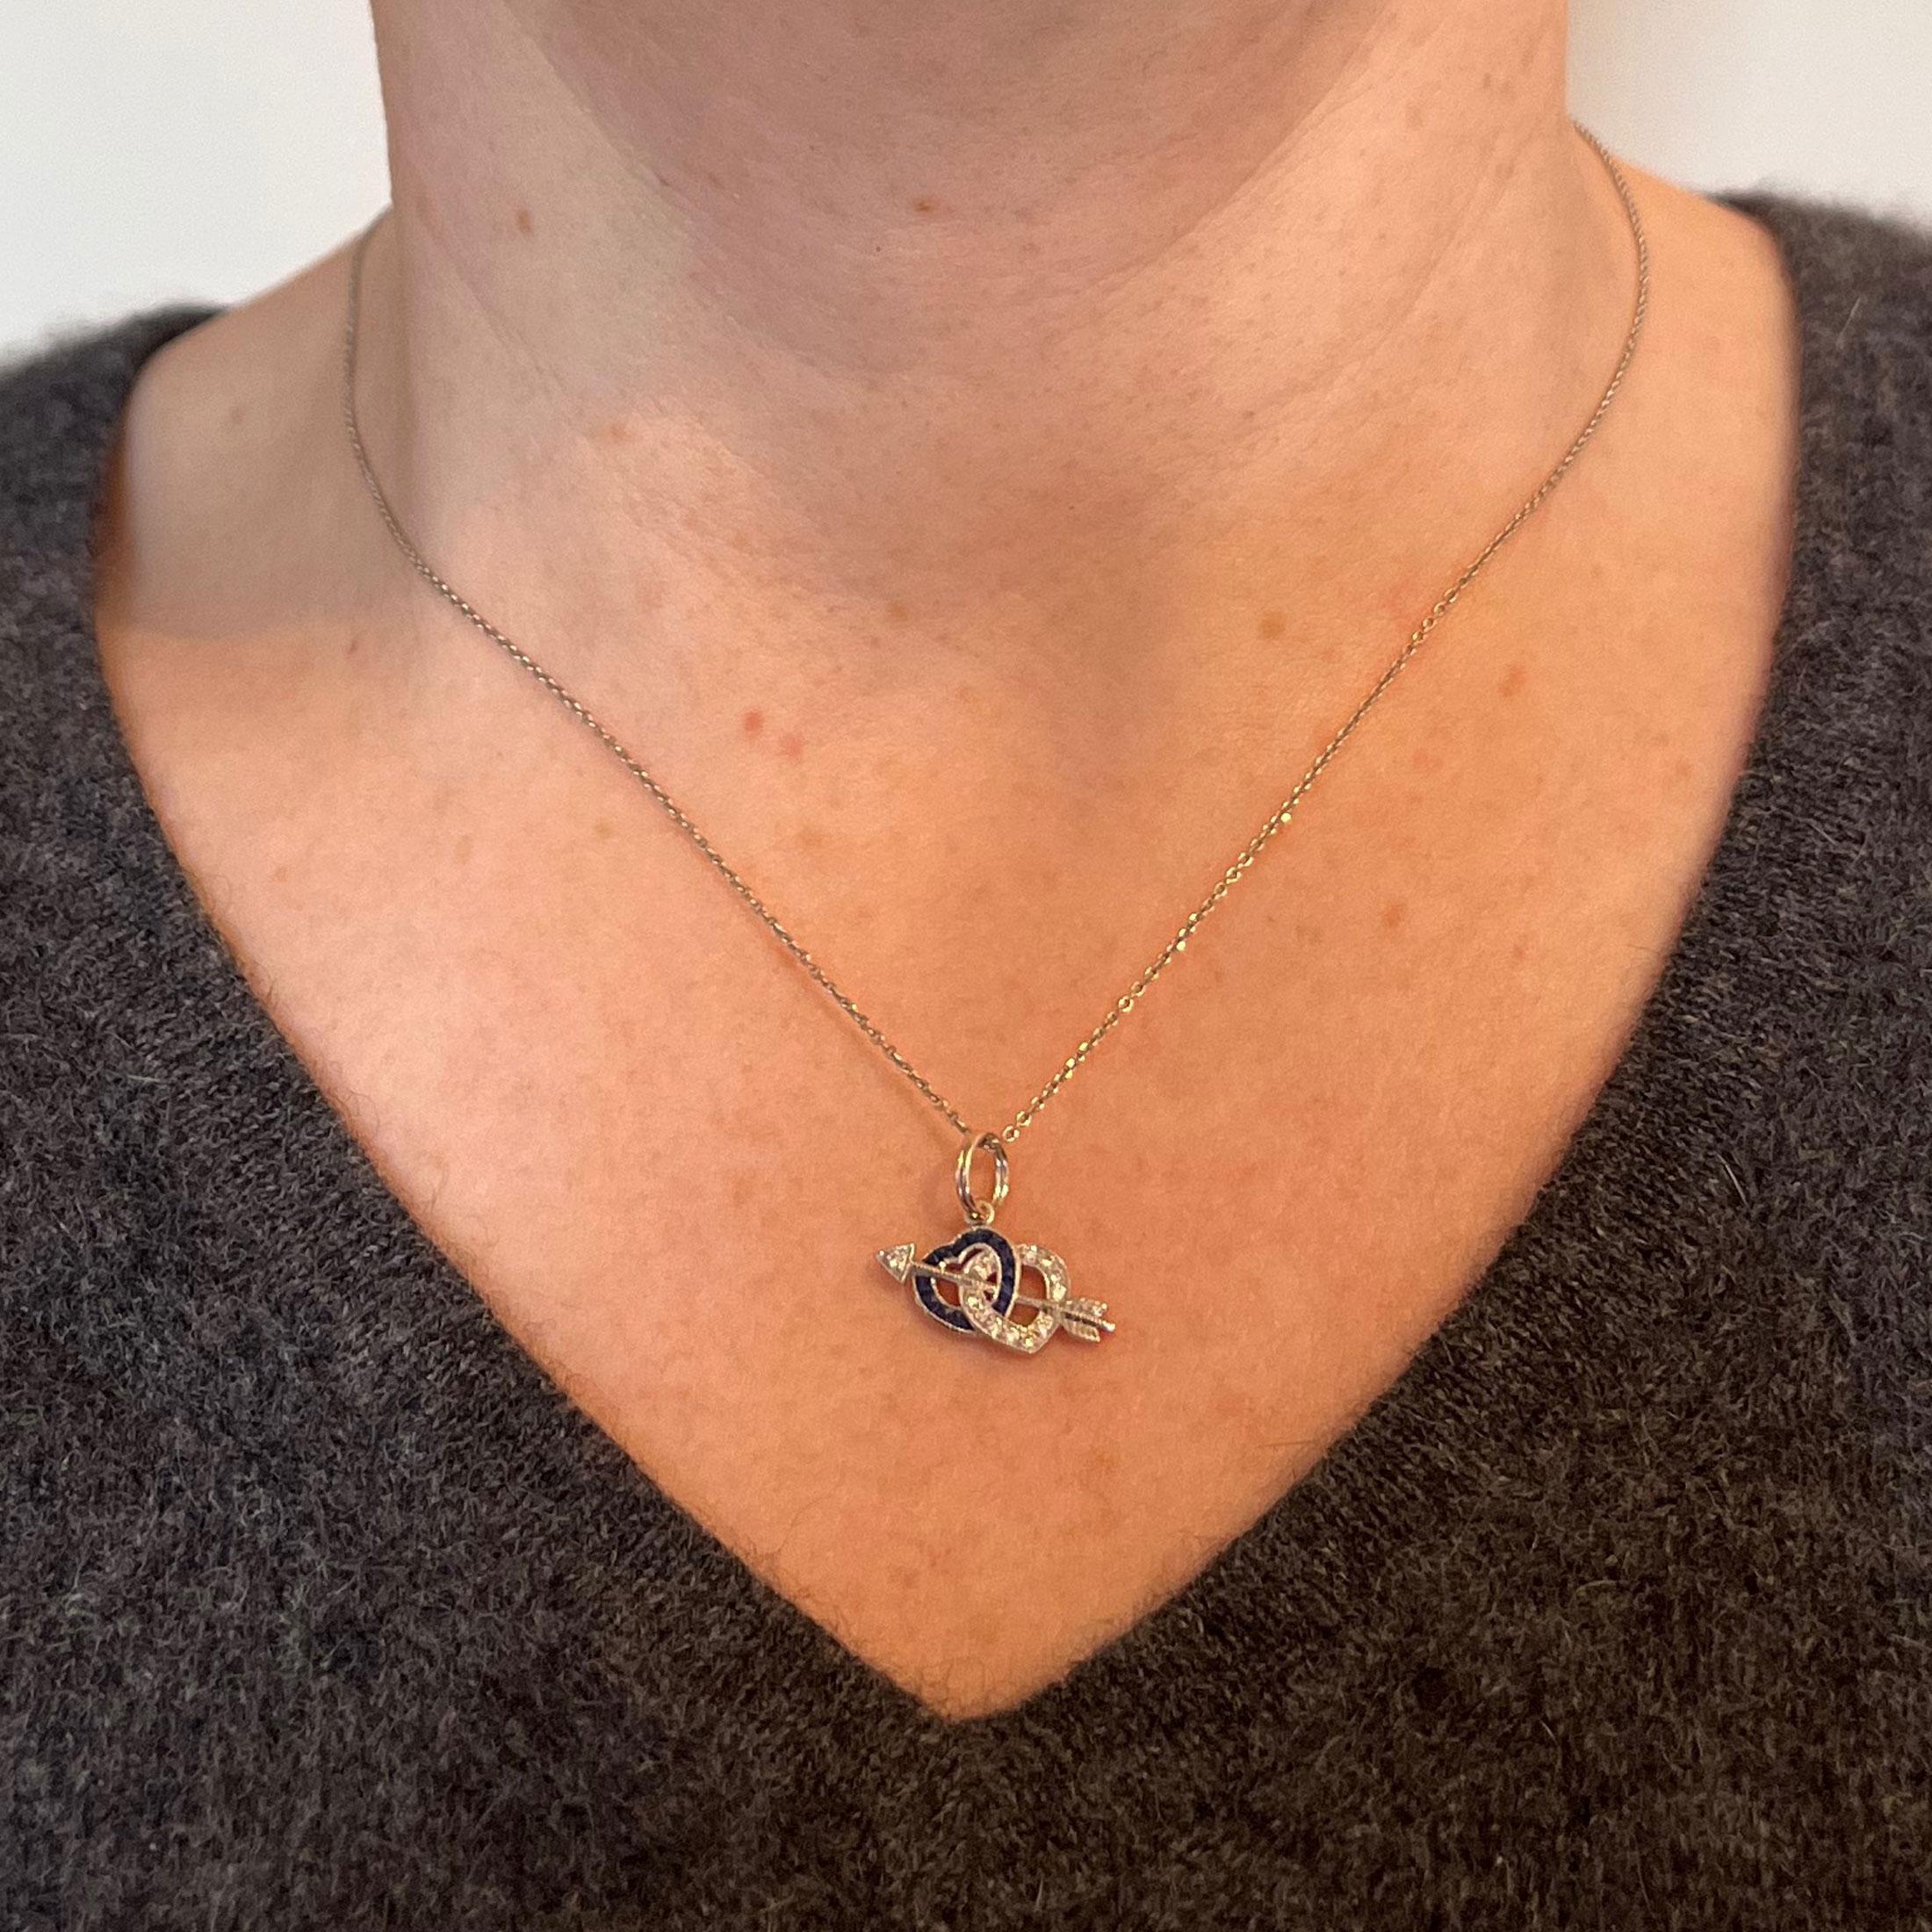 A platinum charm pendant designed as a pair of interlocking hearts in white diamonds and blue sapphires, connected by Cupid’s arrow. Set with 12 round brilliant cut white diamonds and 13 French cut blue sapphires in unmarked but tested